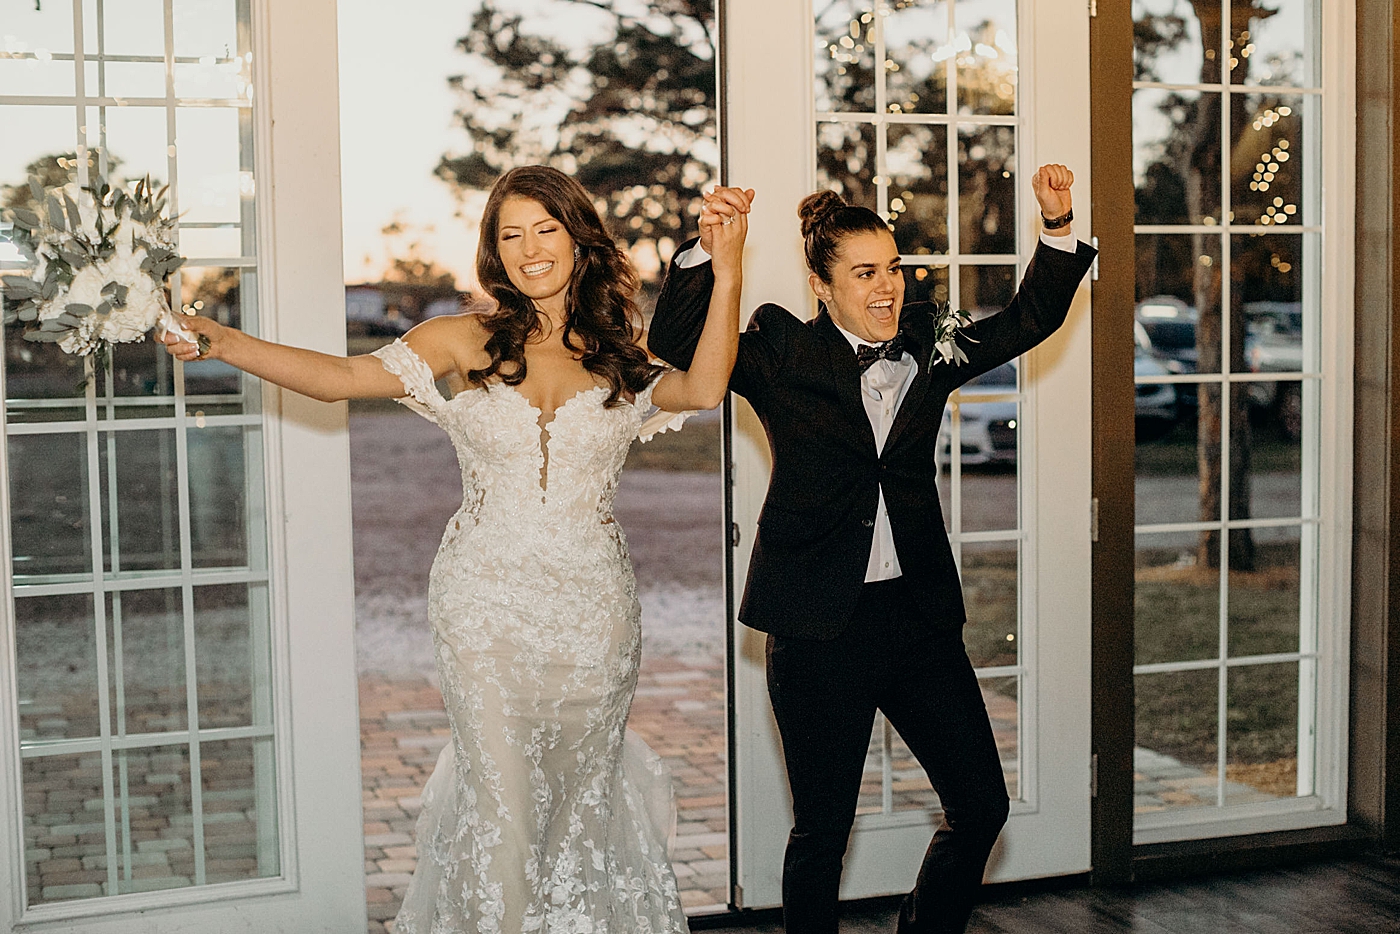 Couples excited entrance into Reception Ever After Farms Wedding Photography captured by South Florida Wedding Photographer Maggie Alvarez Photography